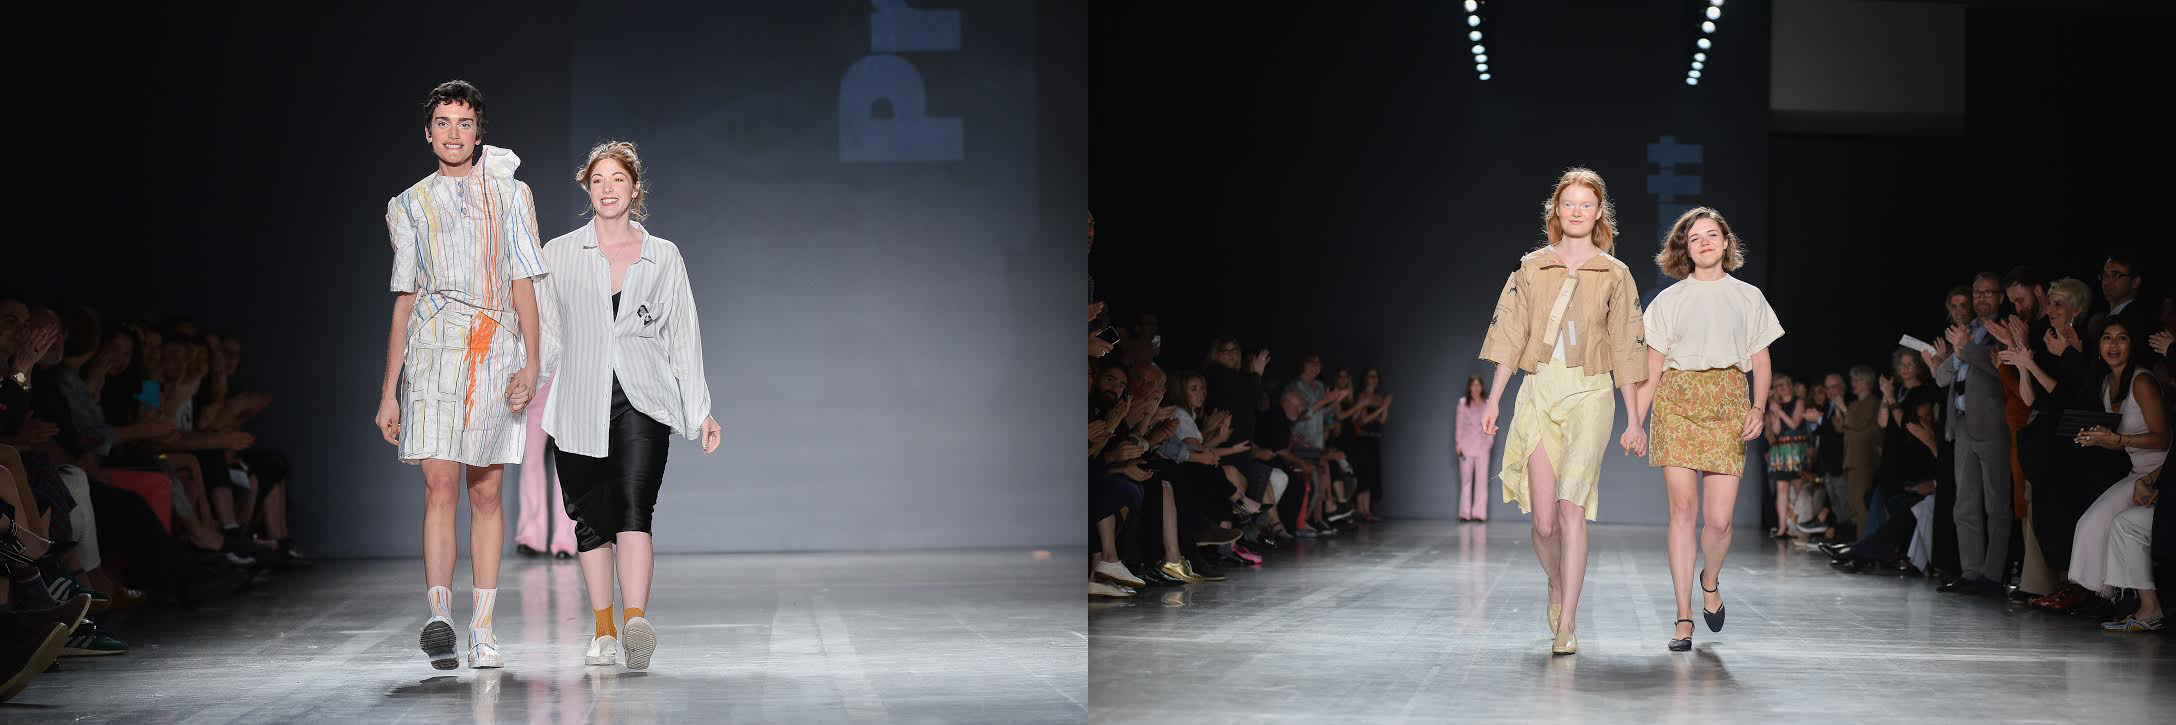 Graduating seniors Rachel Lee (left) and Emily Ridings (right) each walk the runway with a model wearing one of their looks at Pratt Shows: Fashion | Diversiform (photo: Fernando Colon)